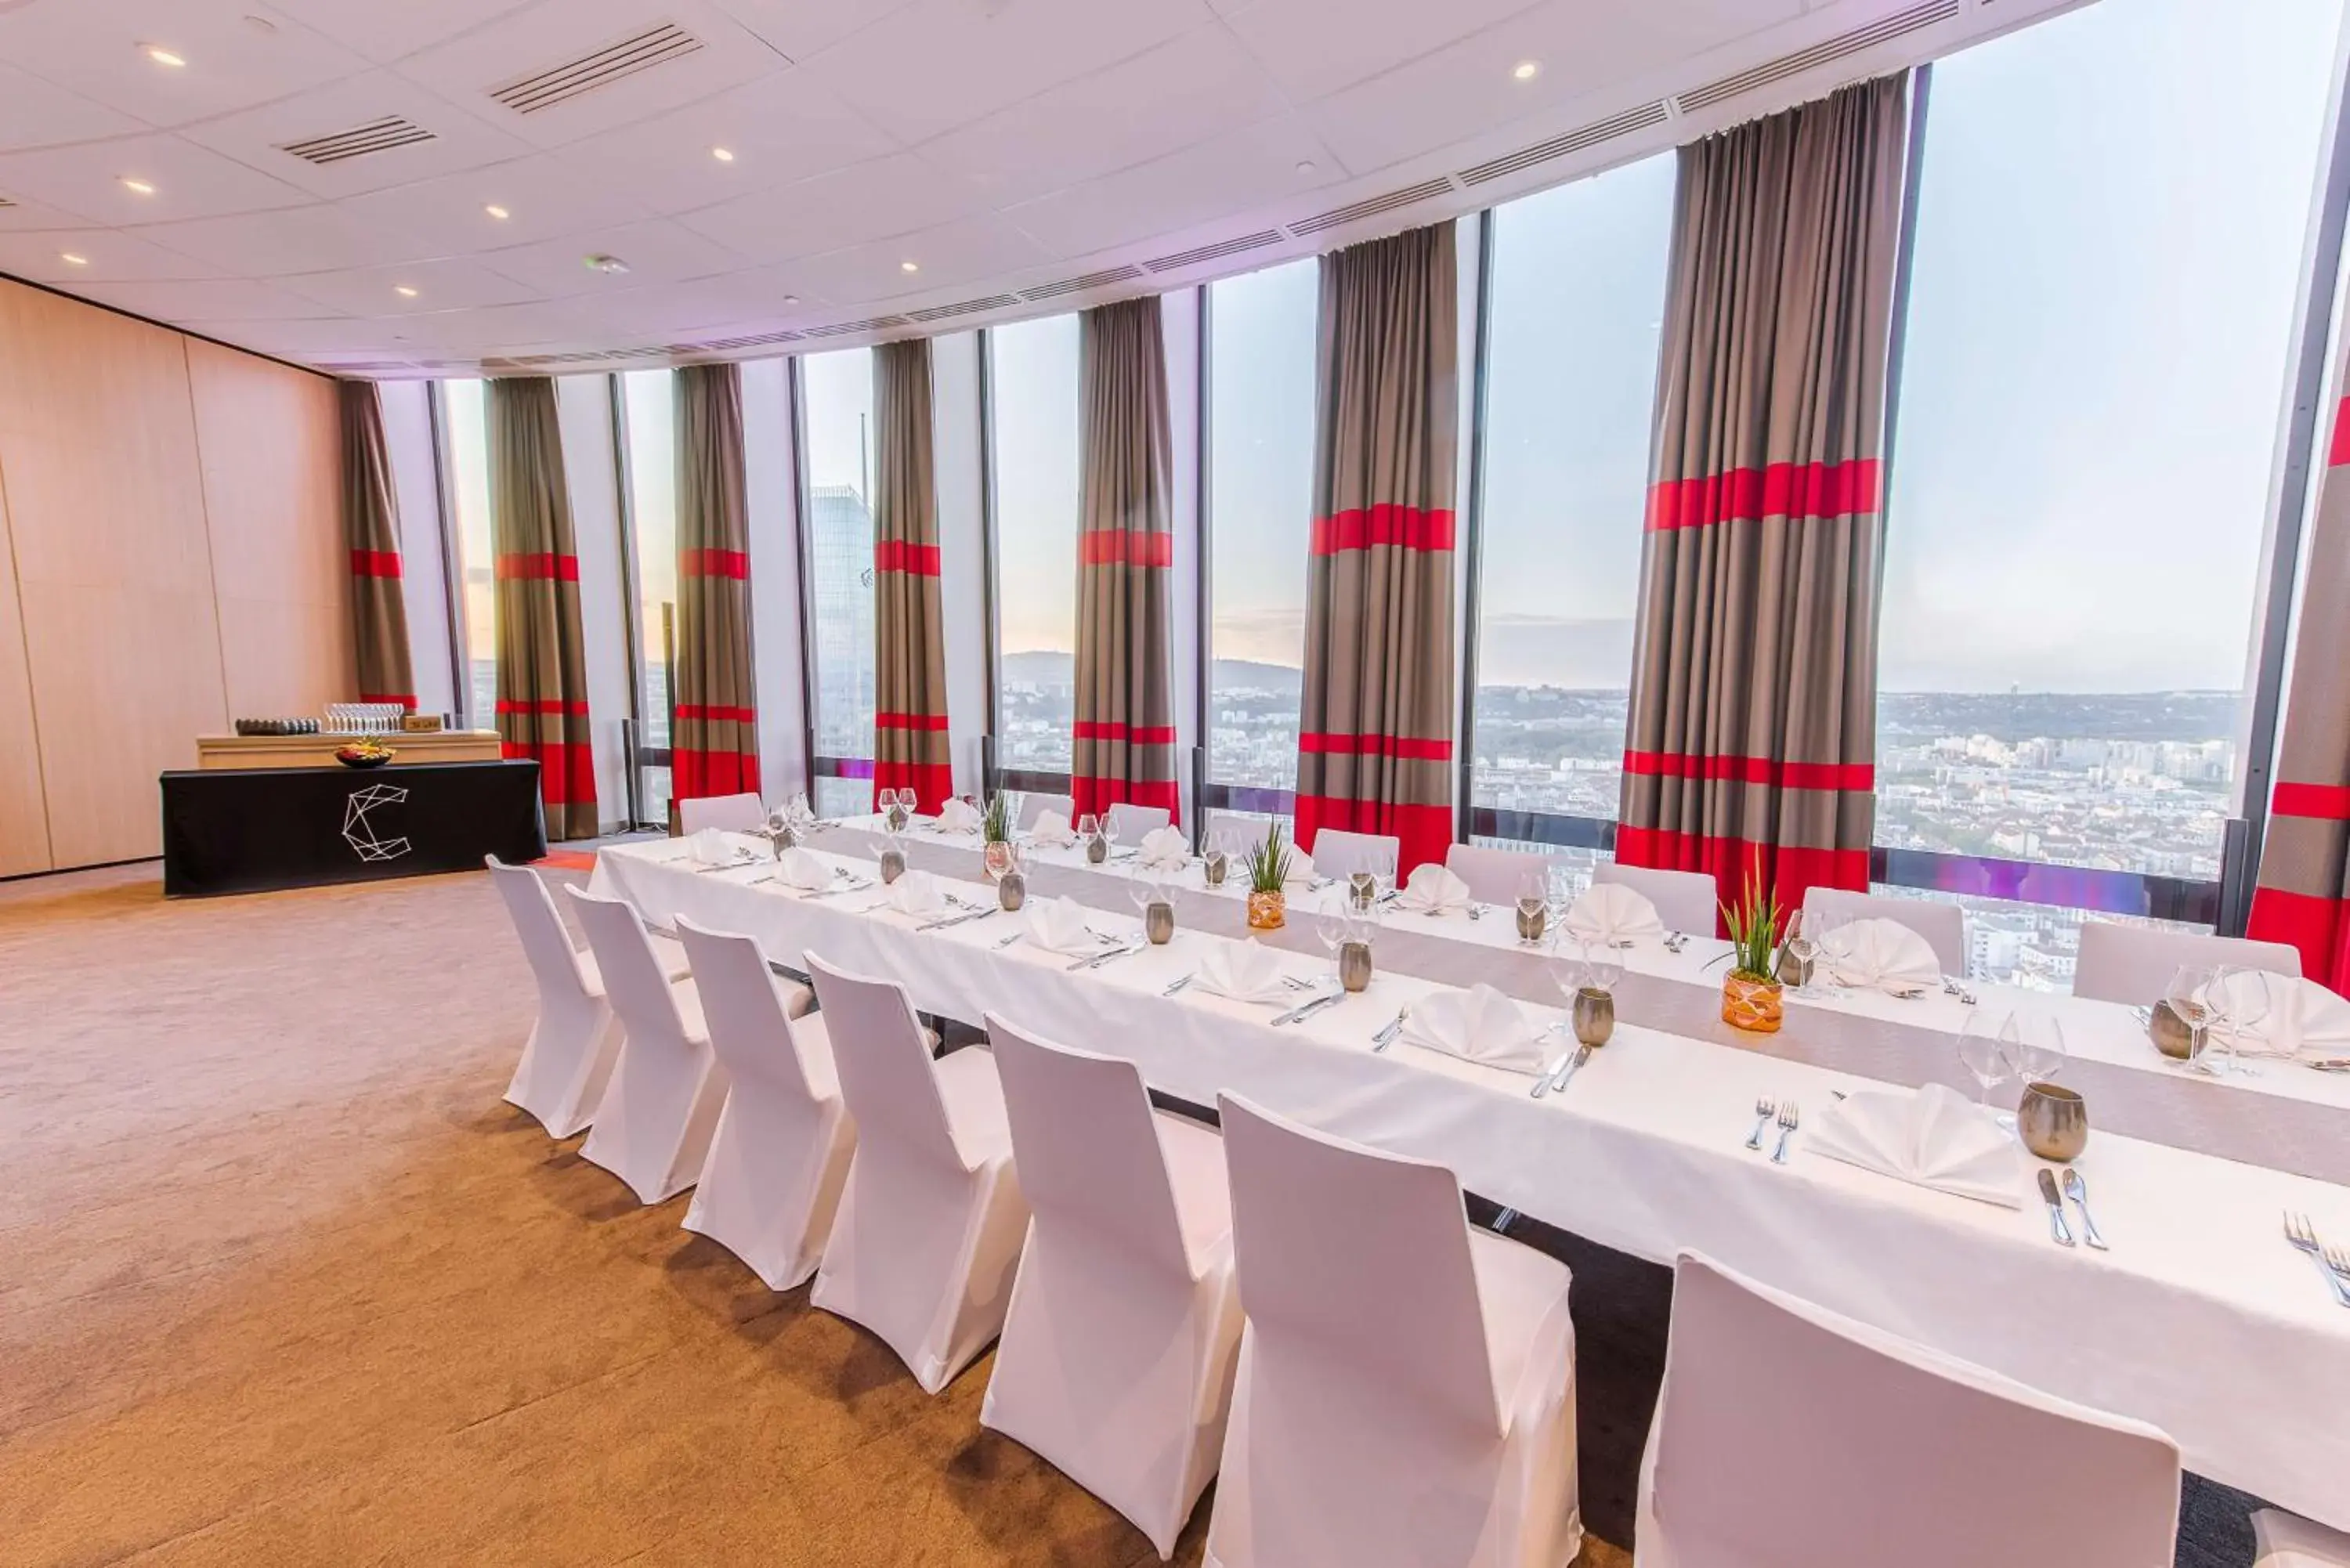 Meeting/conference room, Banquet Facilities in Radisson Blu Hotel, Lyon